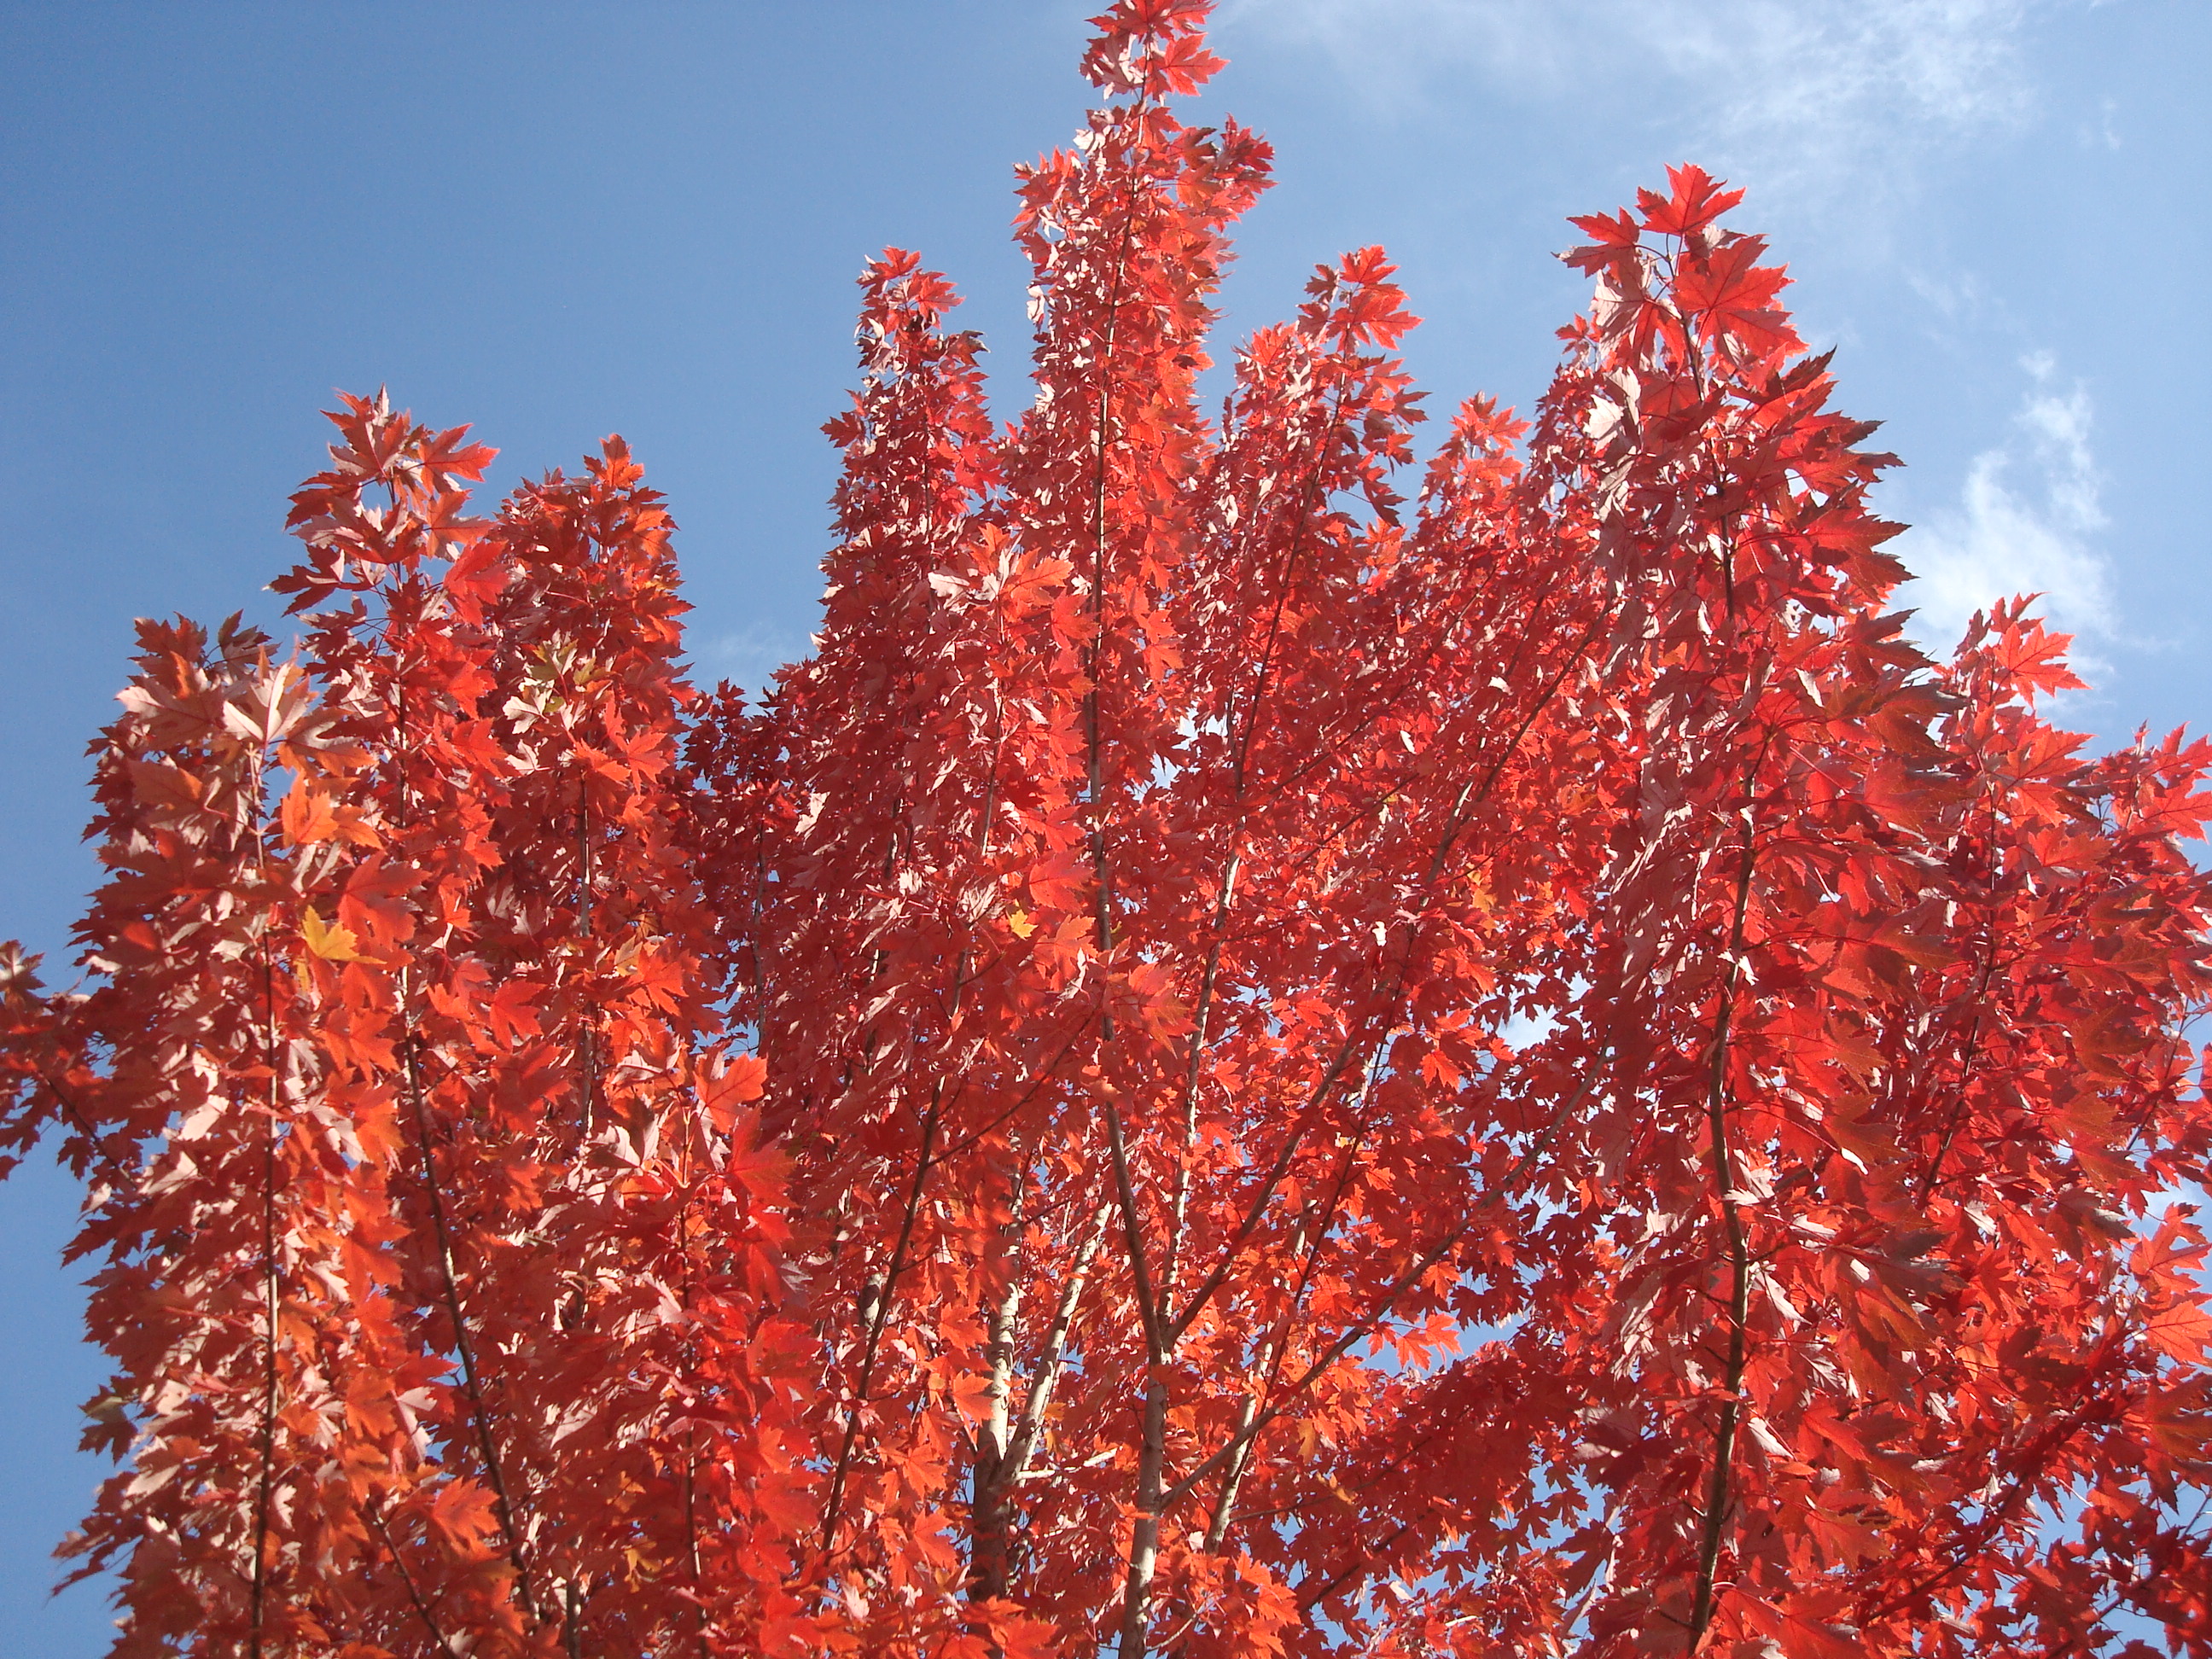 Autumn's bright red leaves